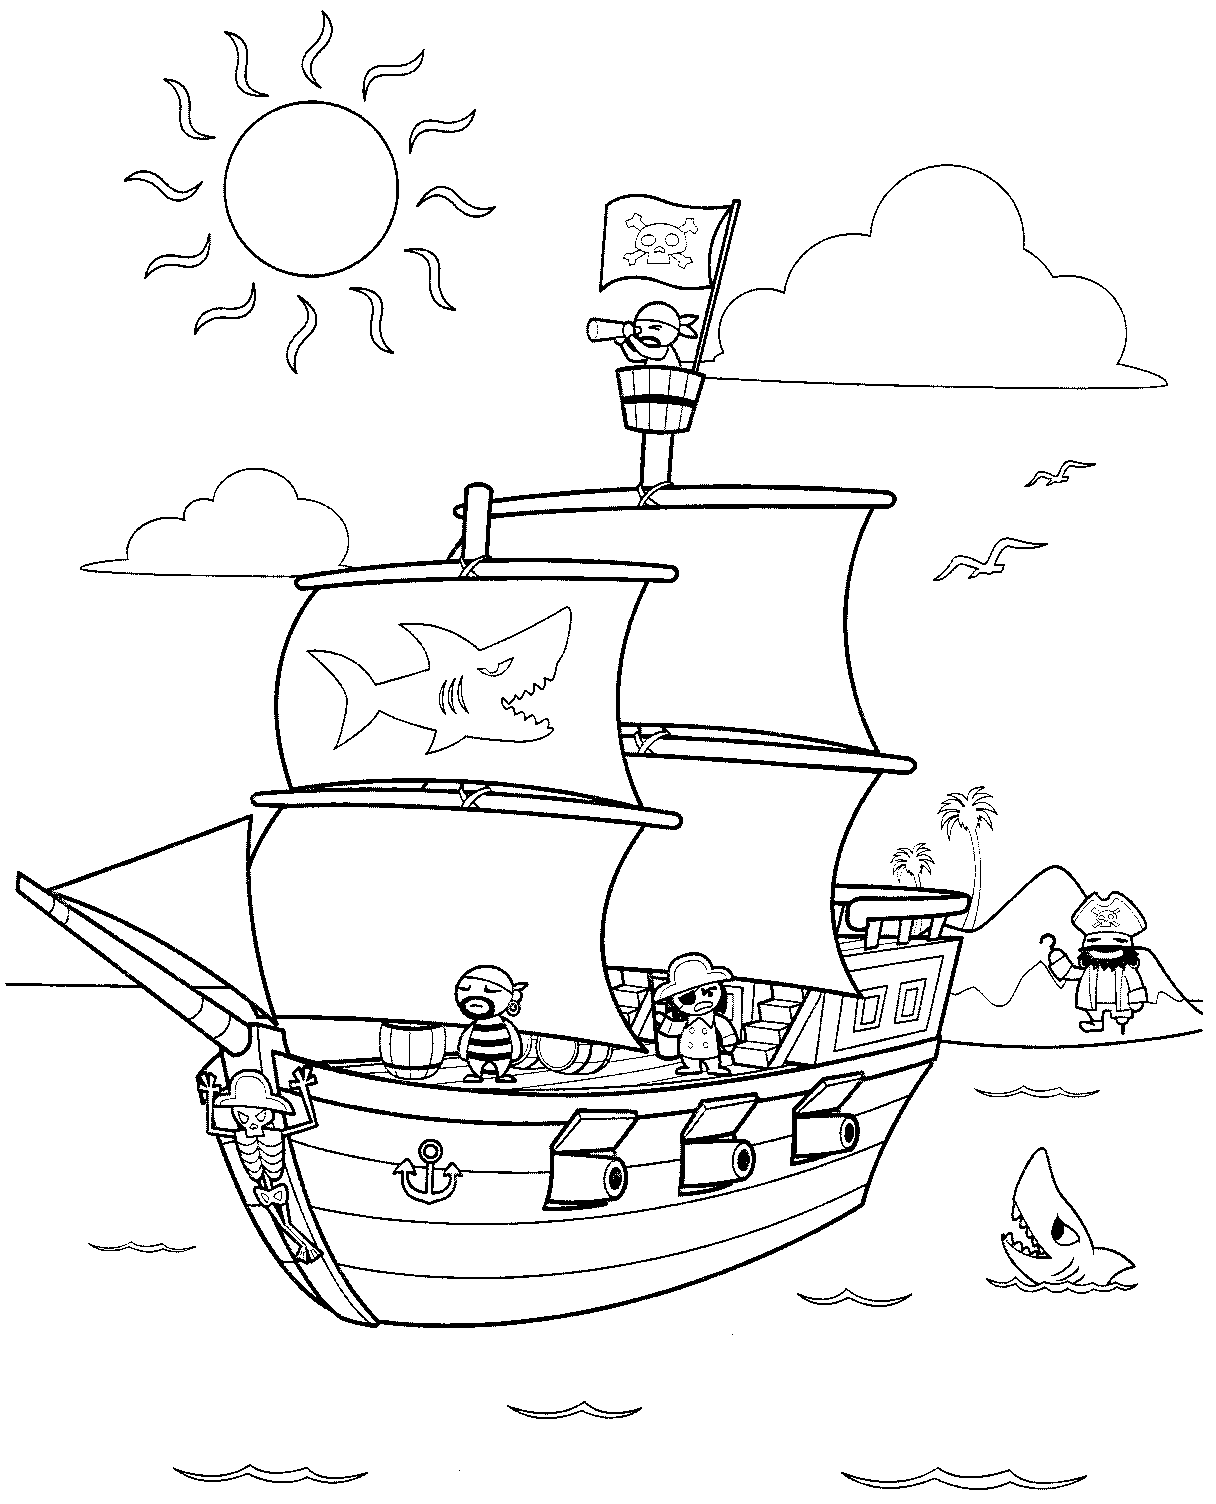 Pirate Ship for Preschool Coloring Page